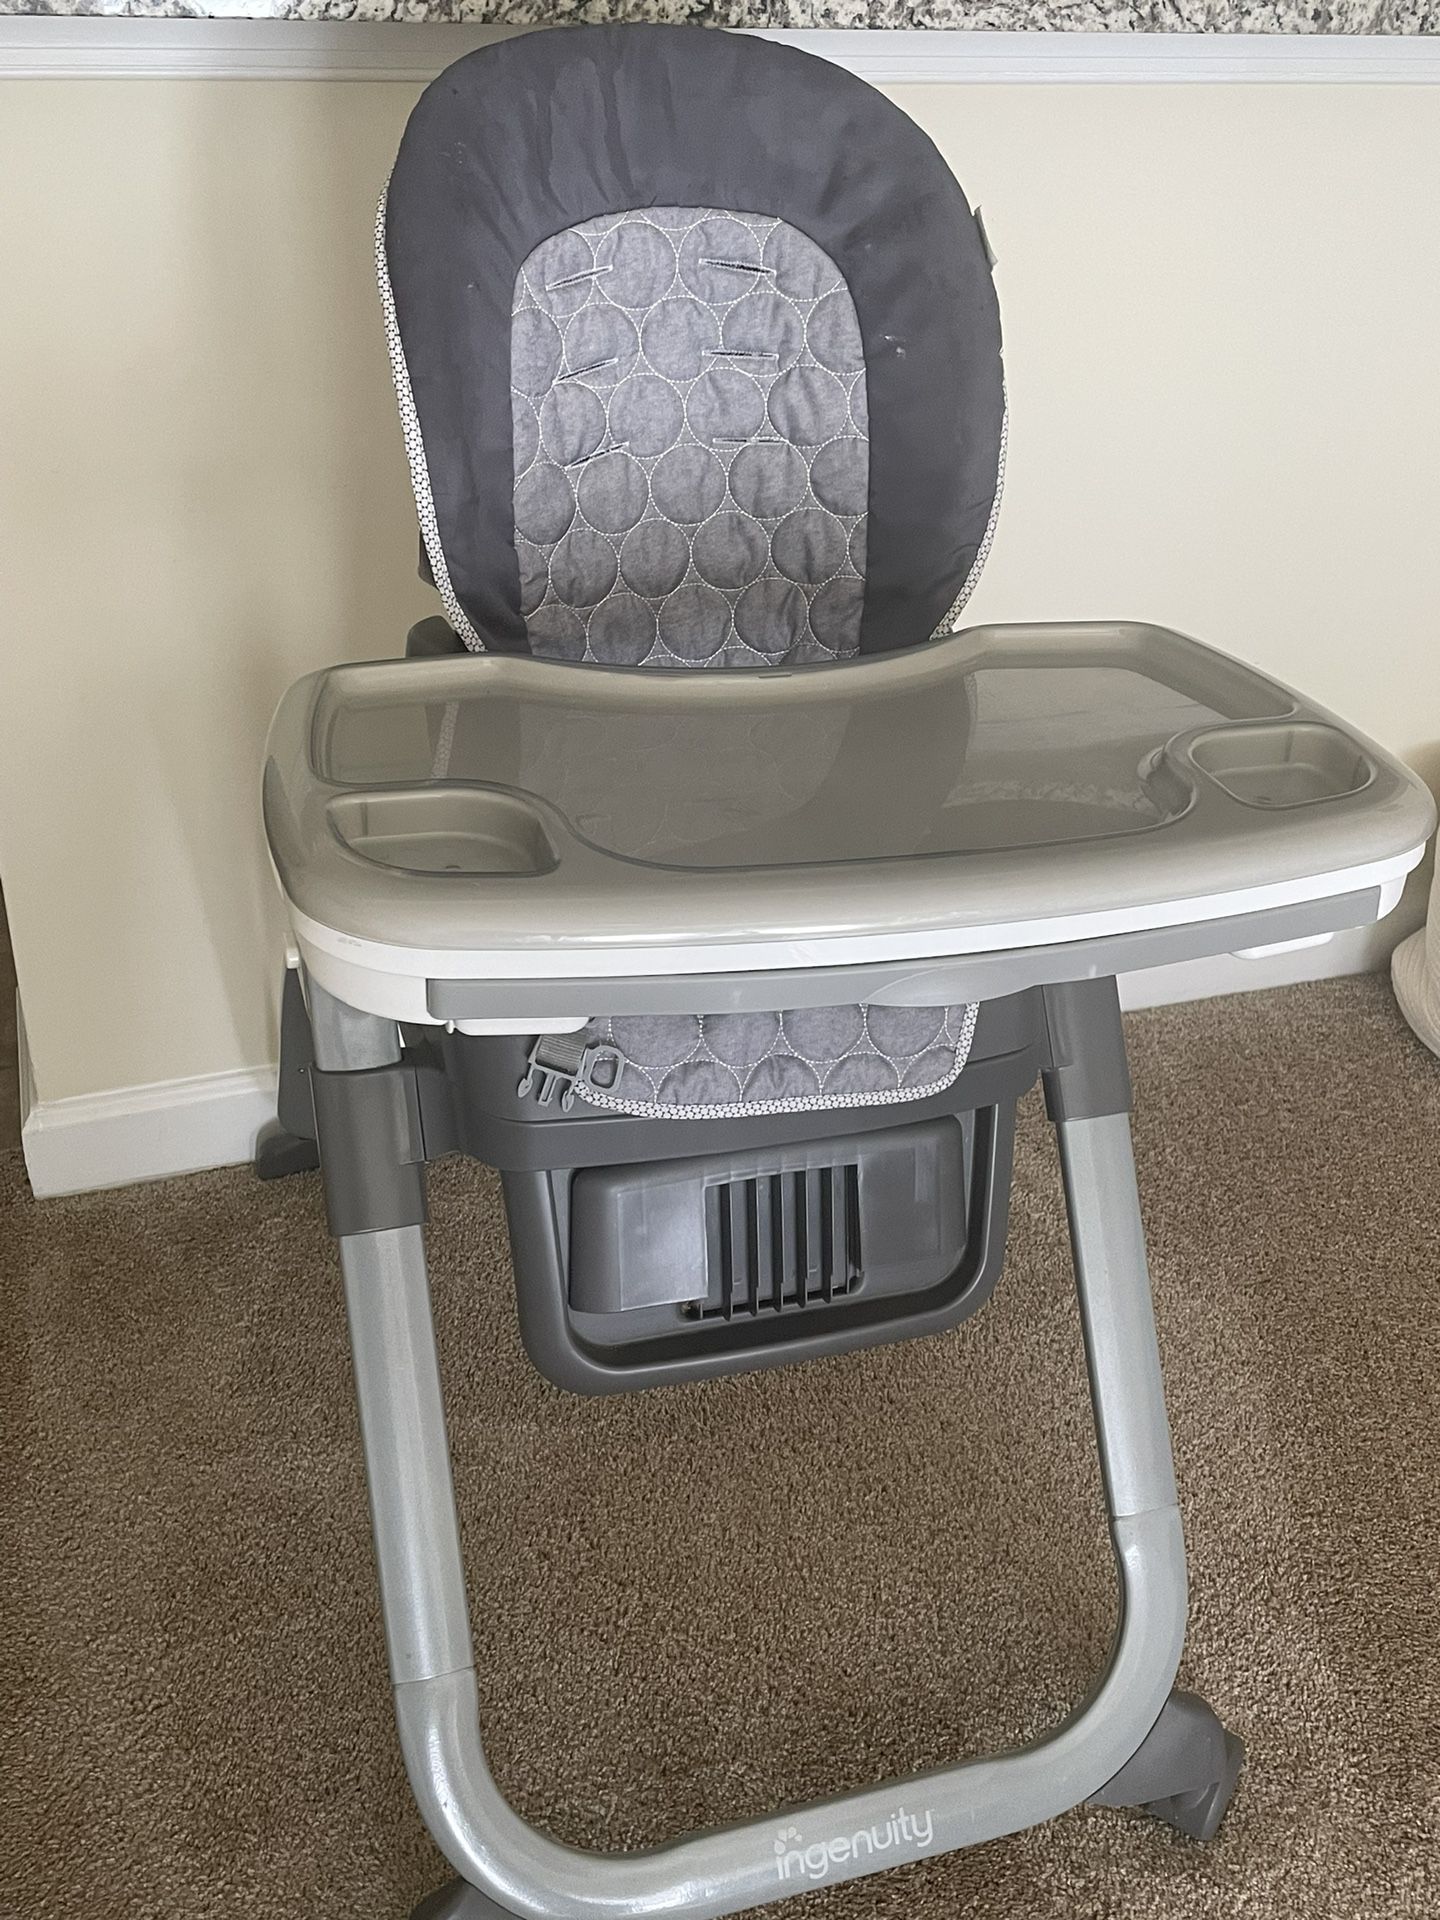 High chair For sale Excellent Condition